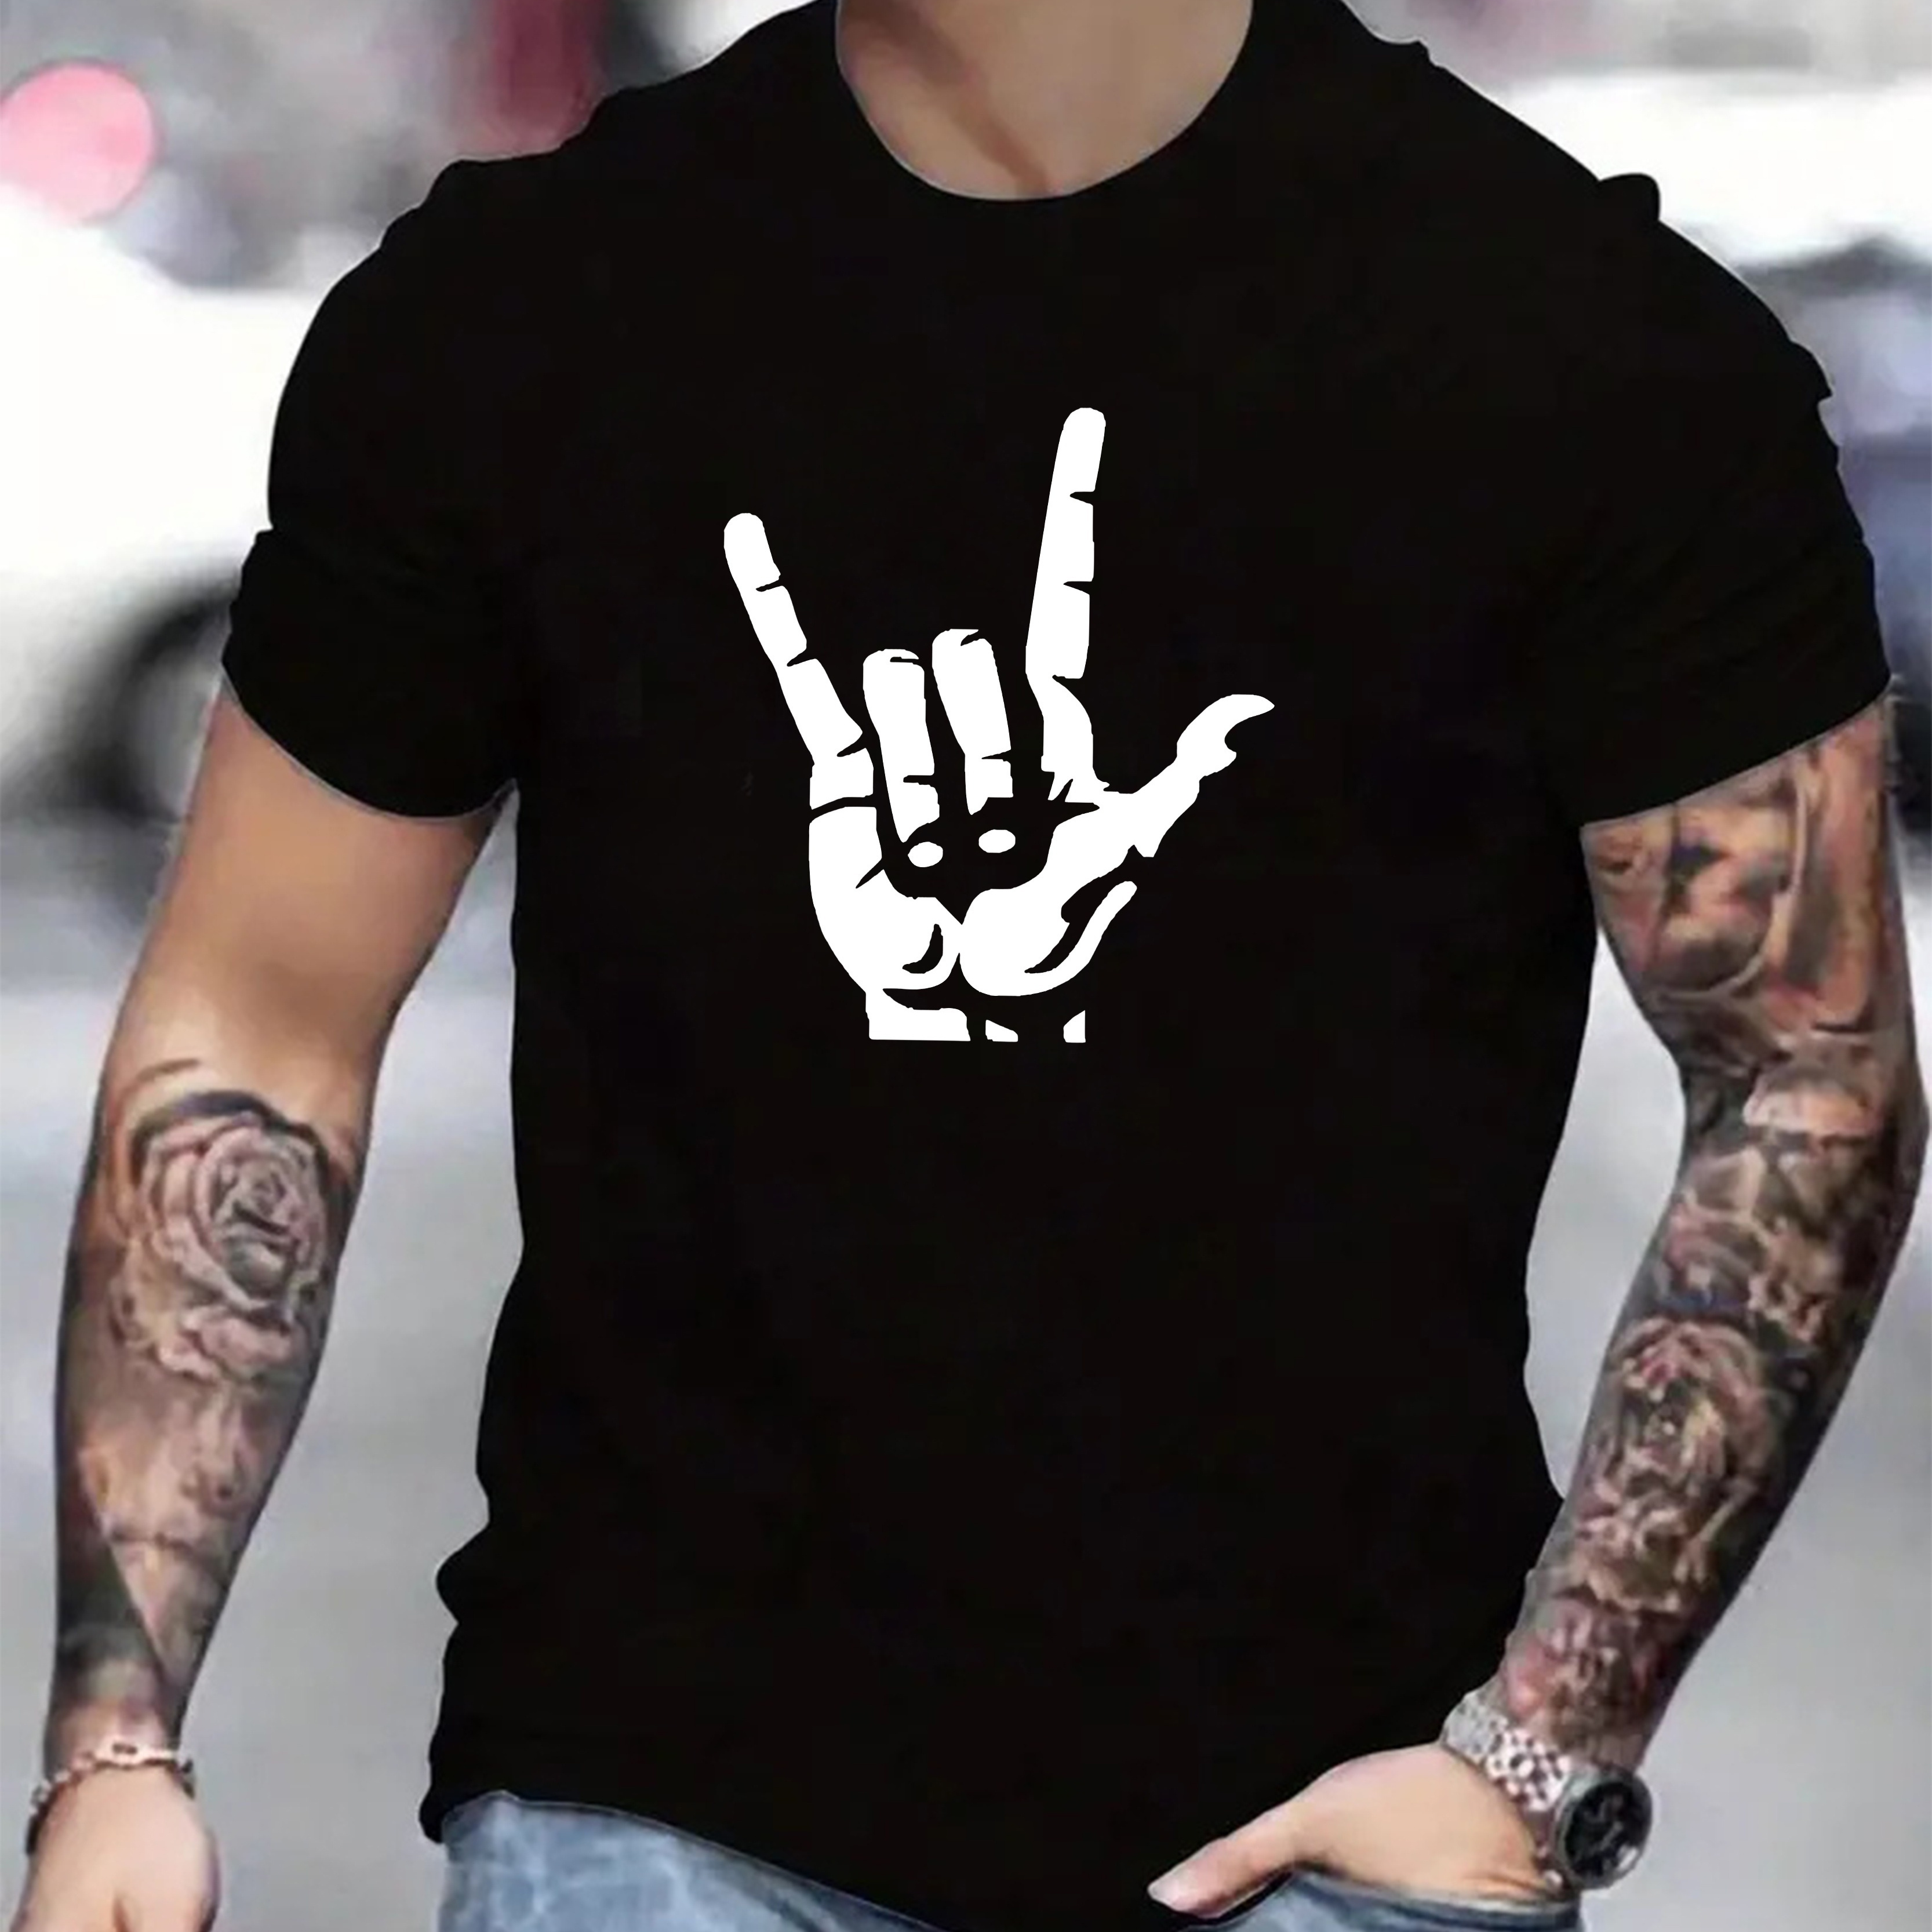 

Rock And Roll Gesture Print T Shirt, Tees For Men, Casual Short Sleeve T-shirt For Summer